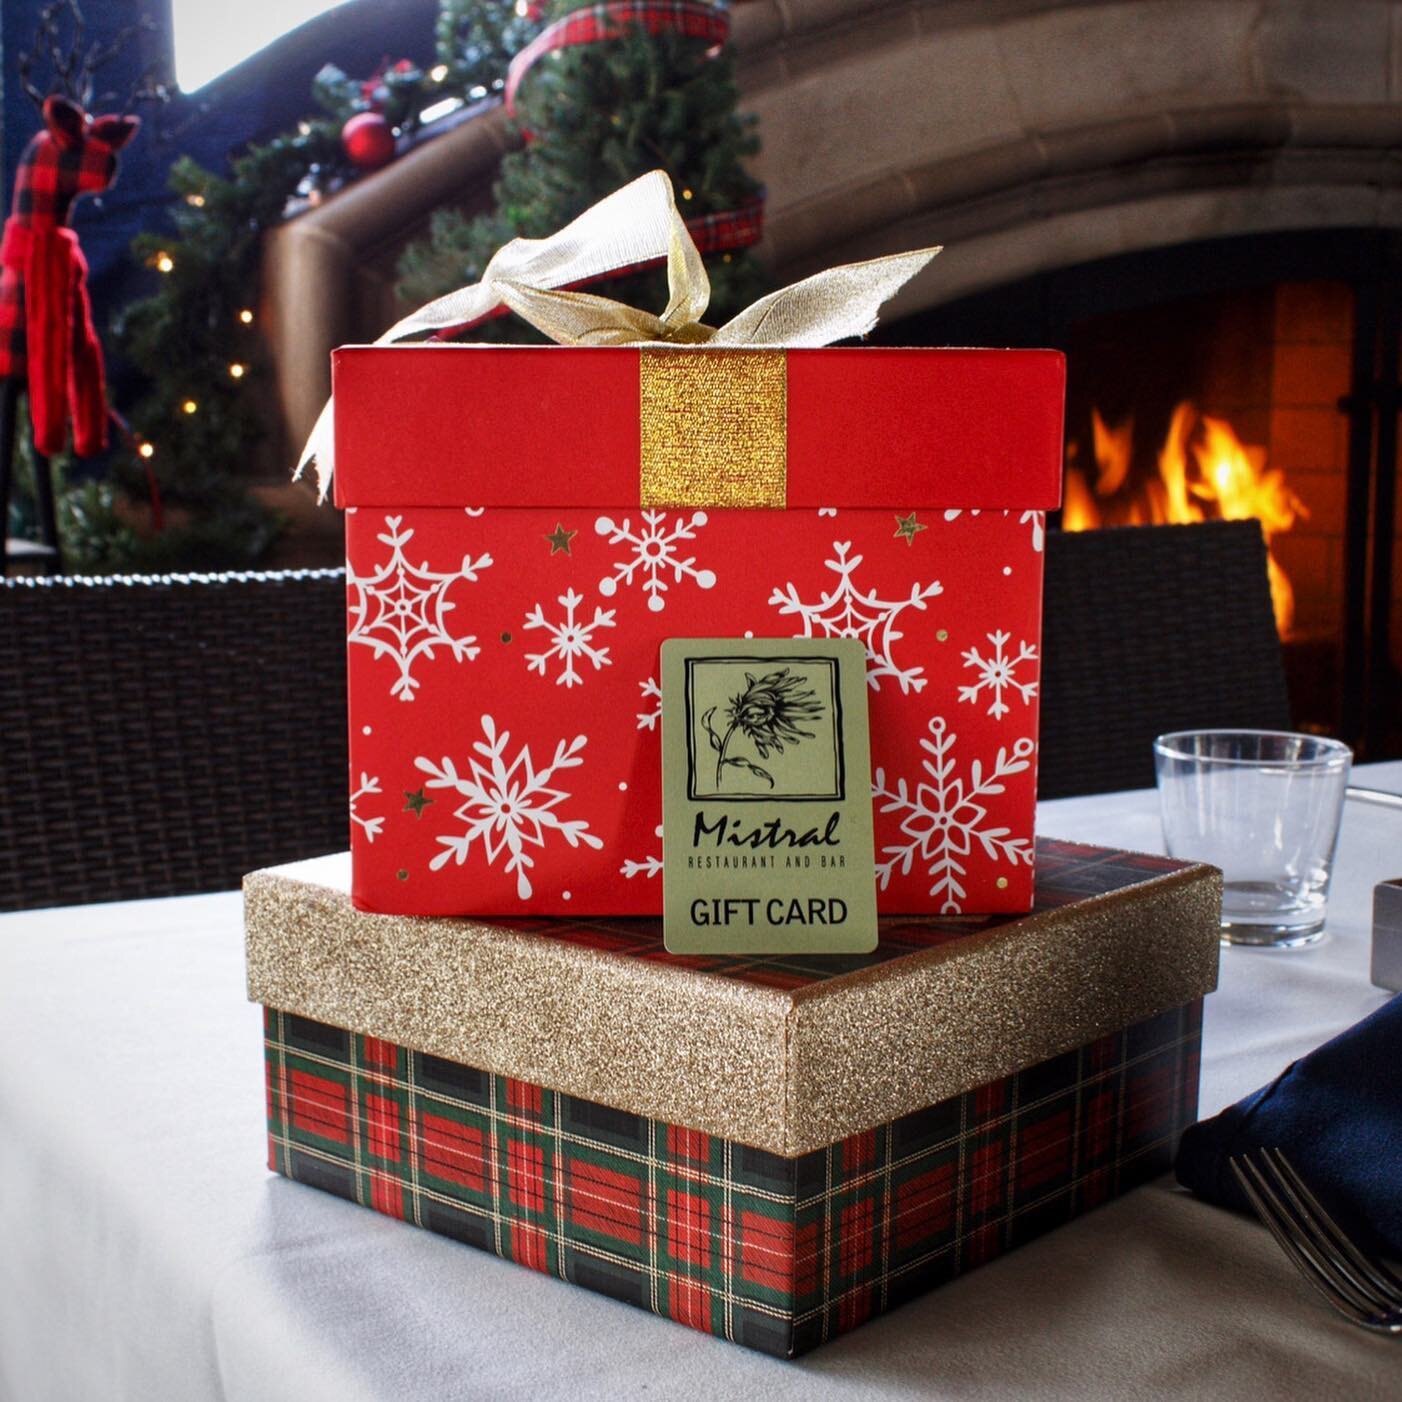 &lsquo;Tis the season! Gift an unforgettable dining experience at Mistral. 🎁🎄